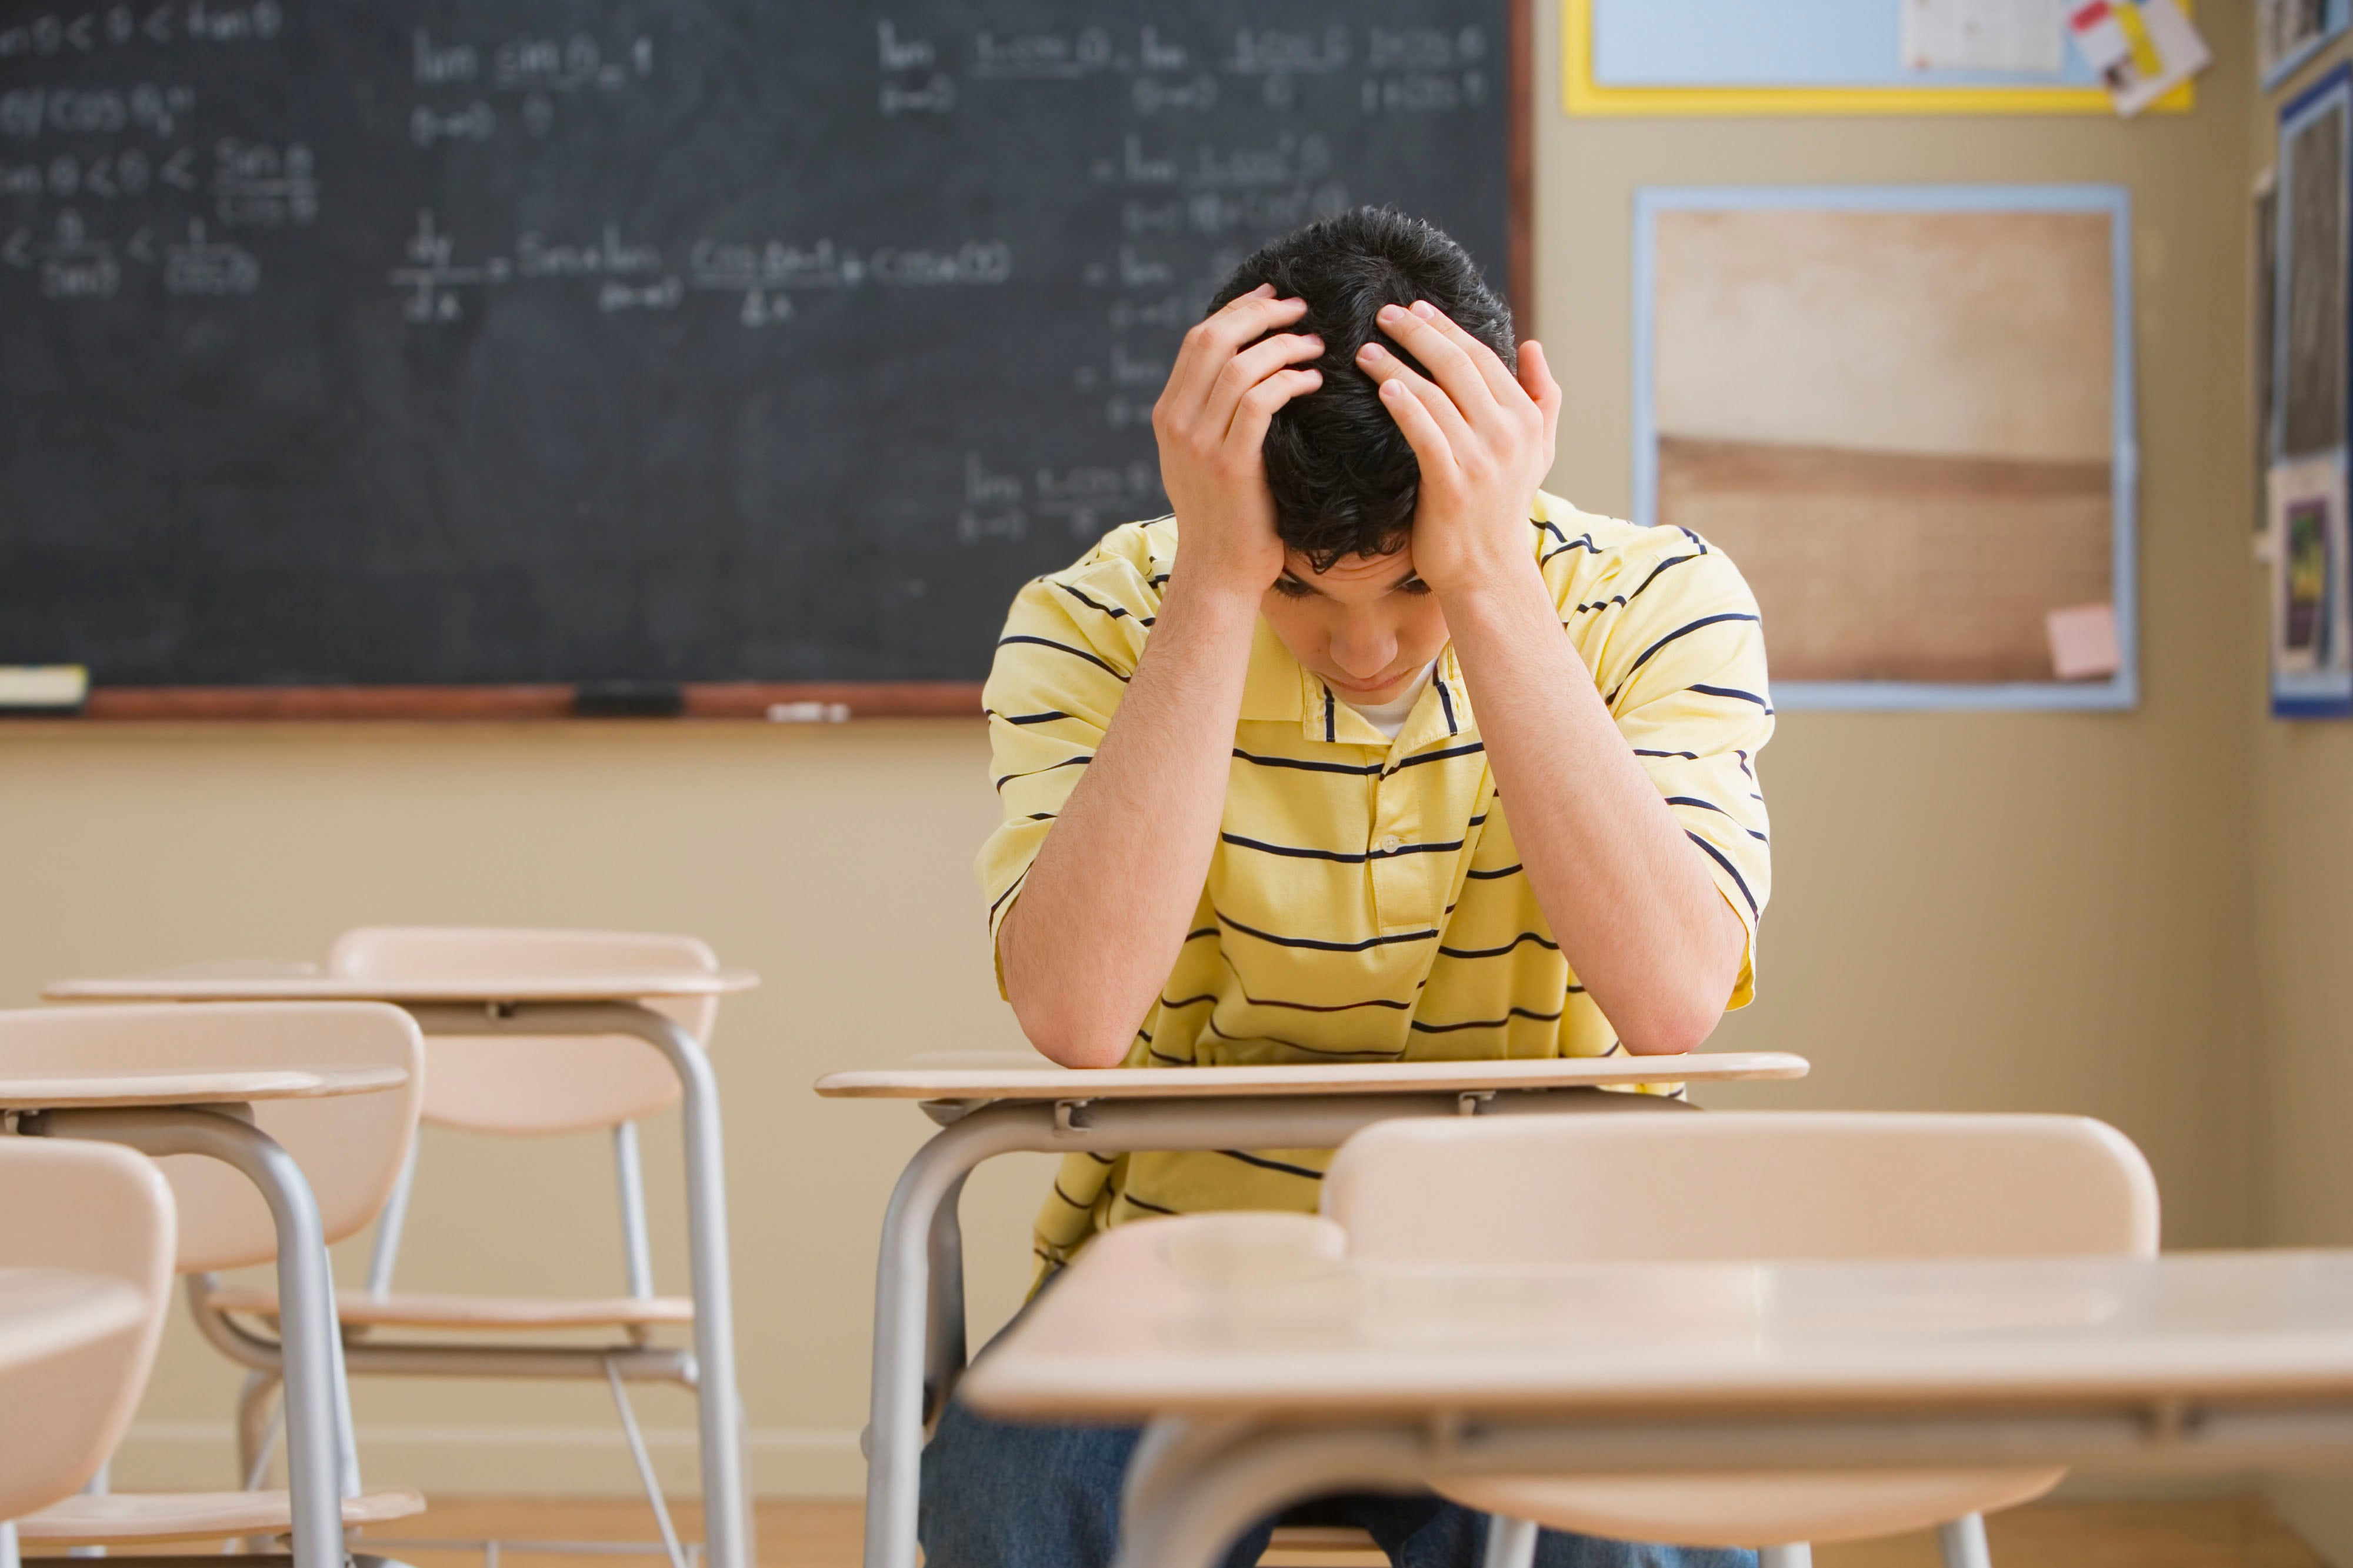 A teen boy wearing a yellow shirt holds his head in his hands while sitting at a wooden desk in a classroom.